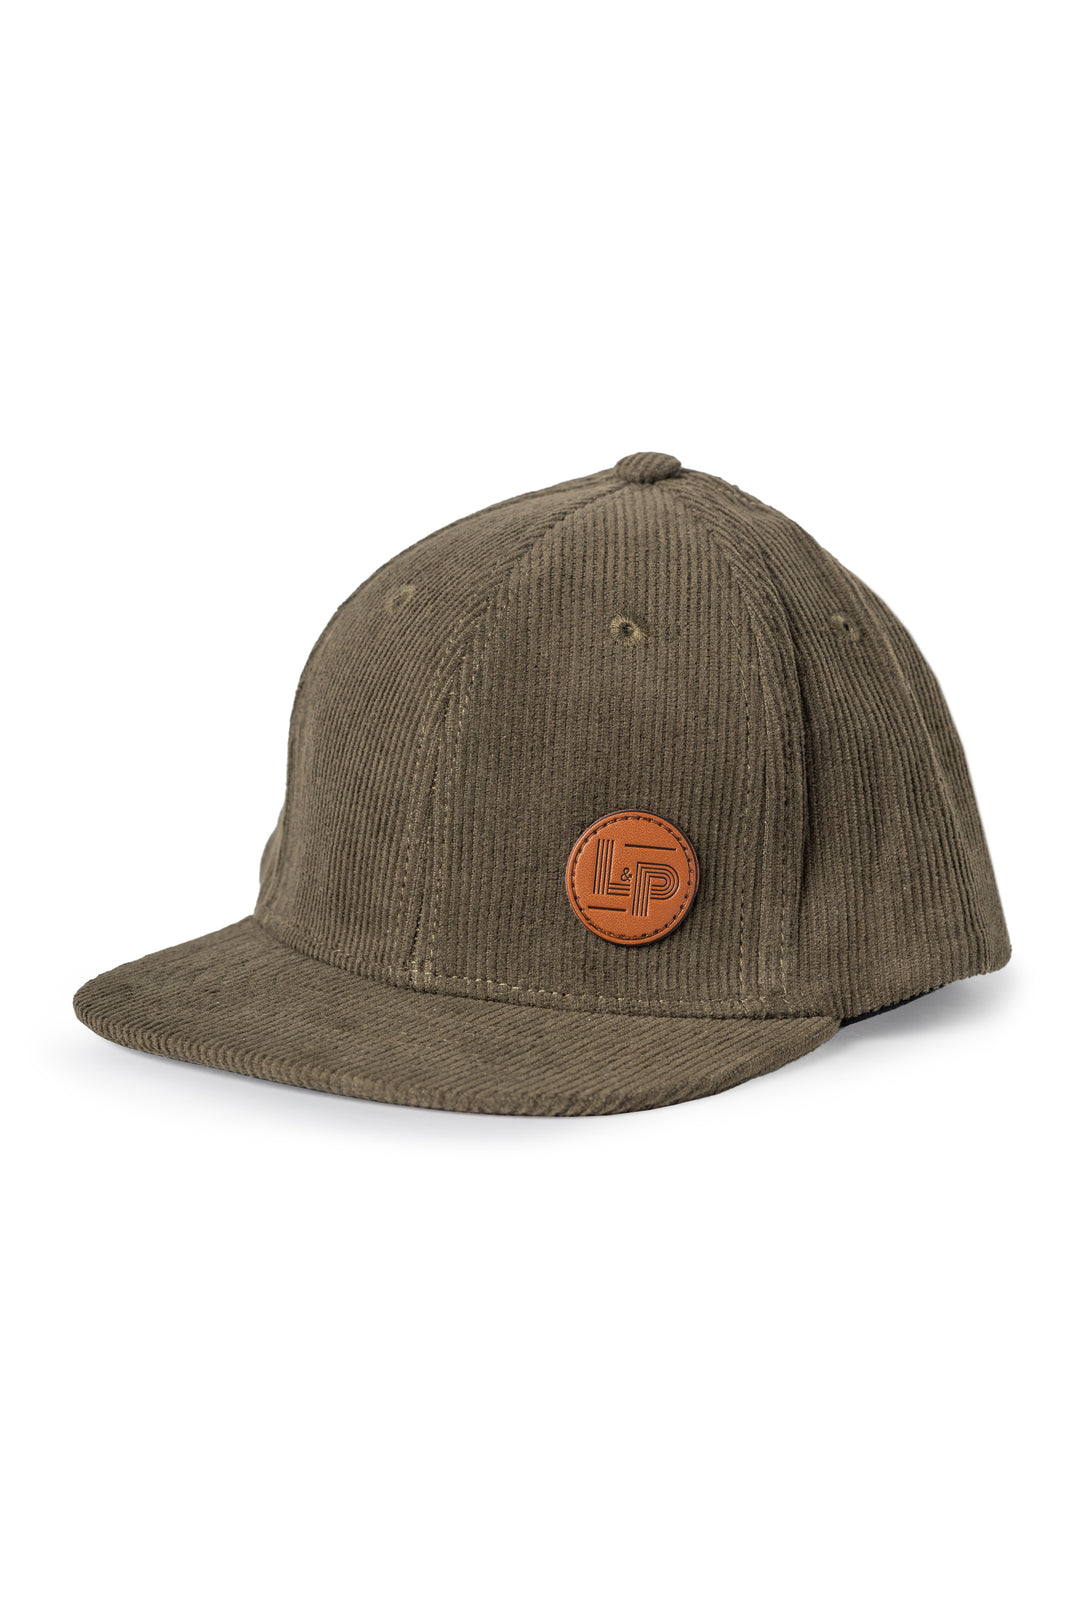 Rochester series corduroy cap - Fit Classik [Baby]